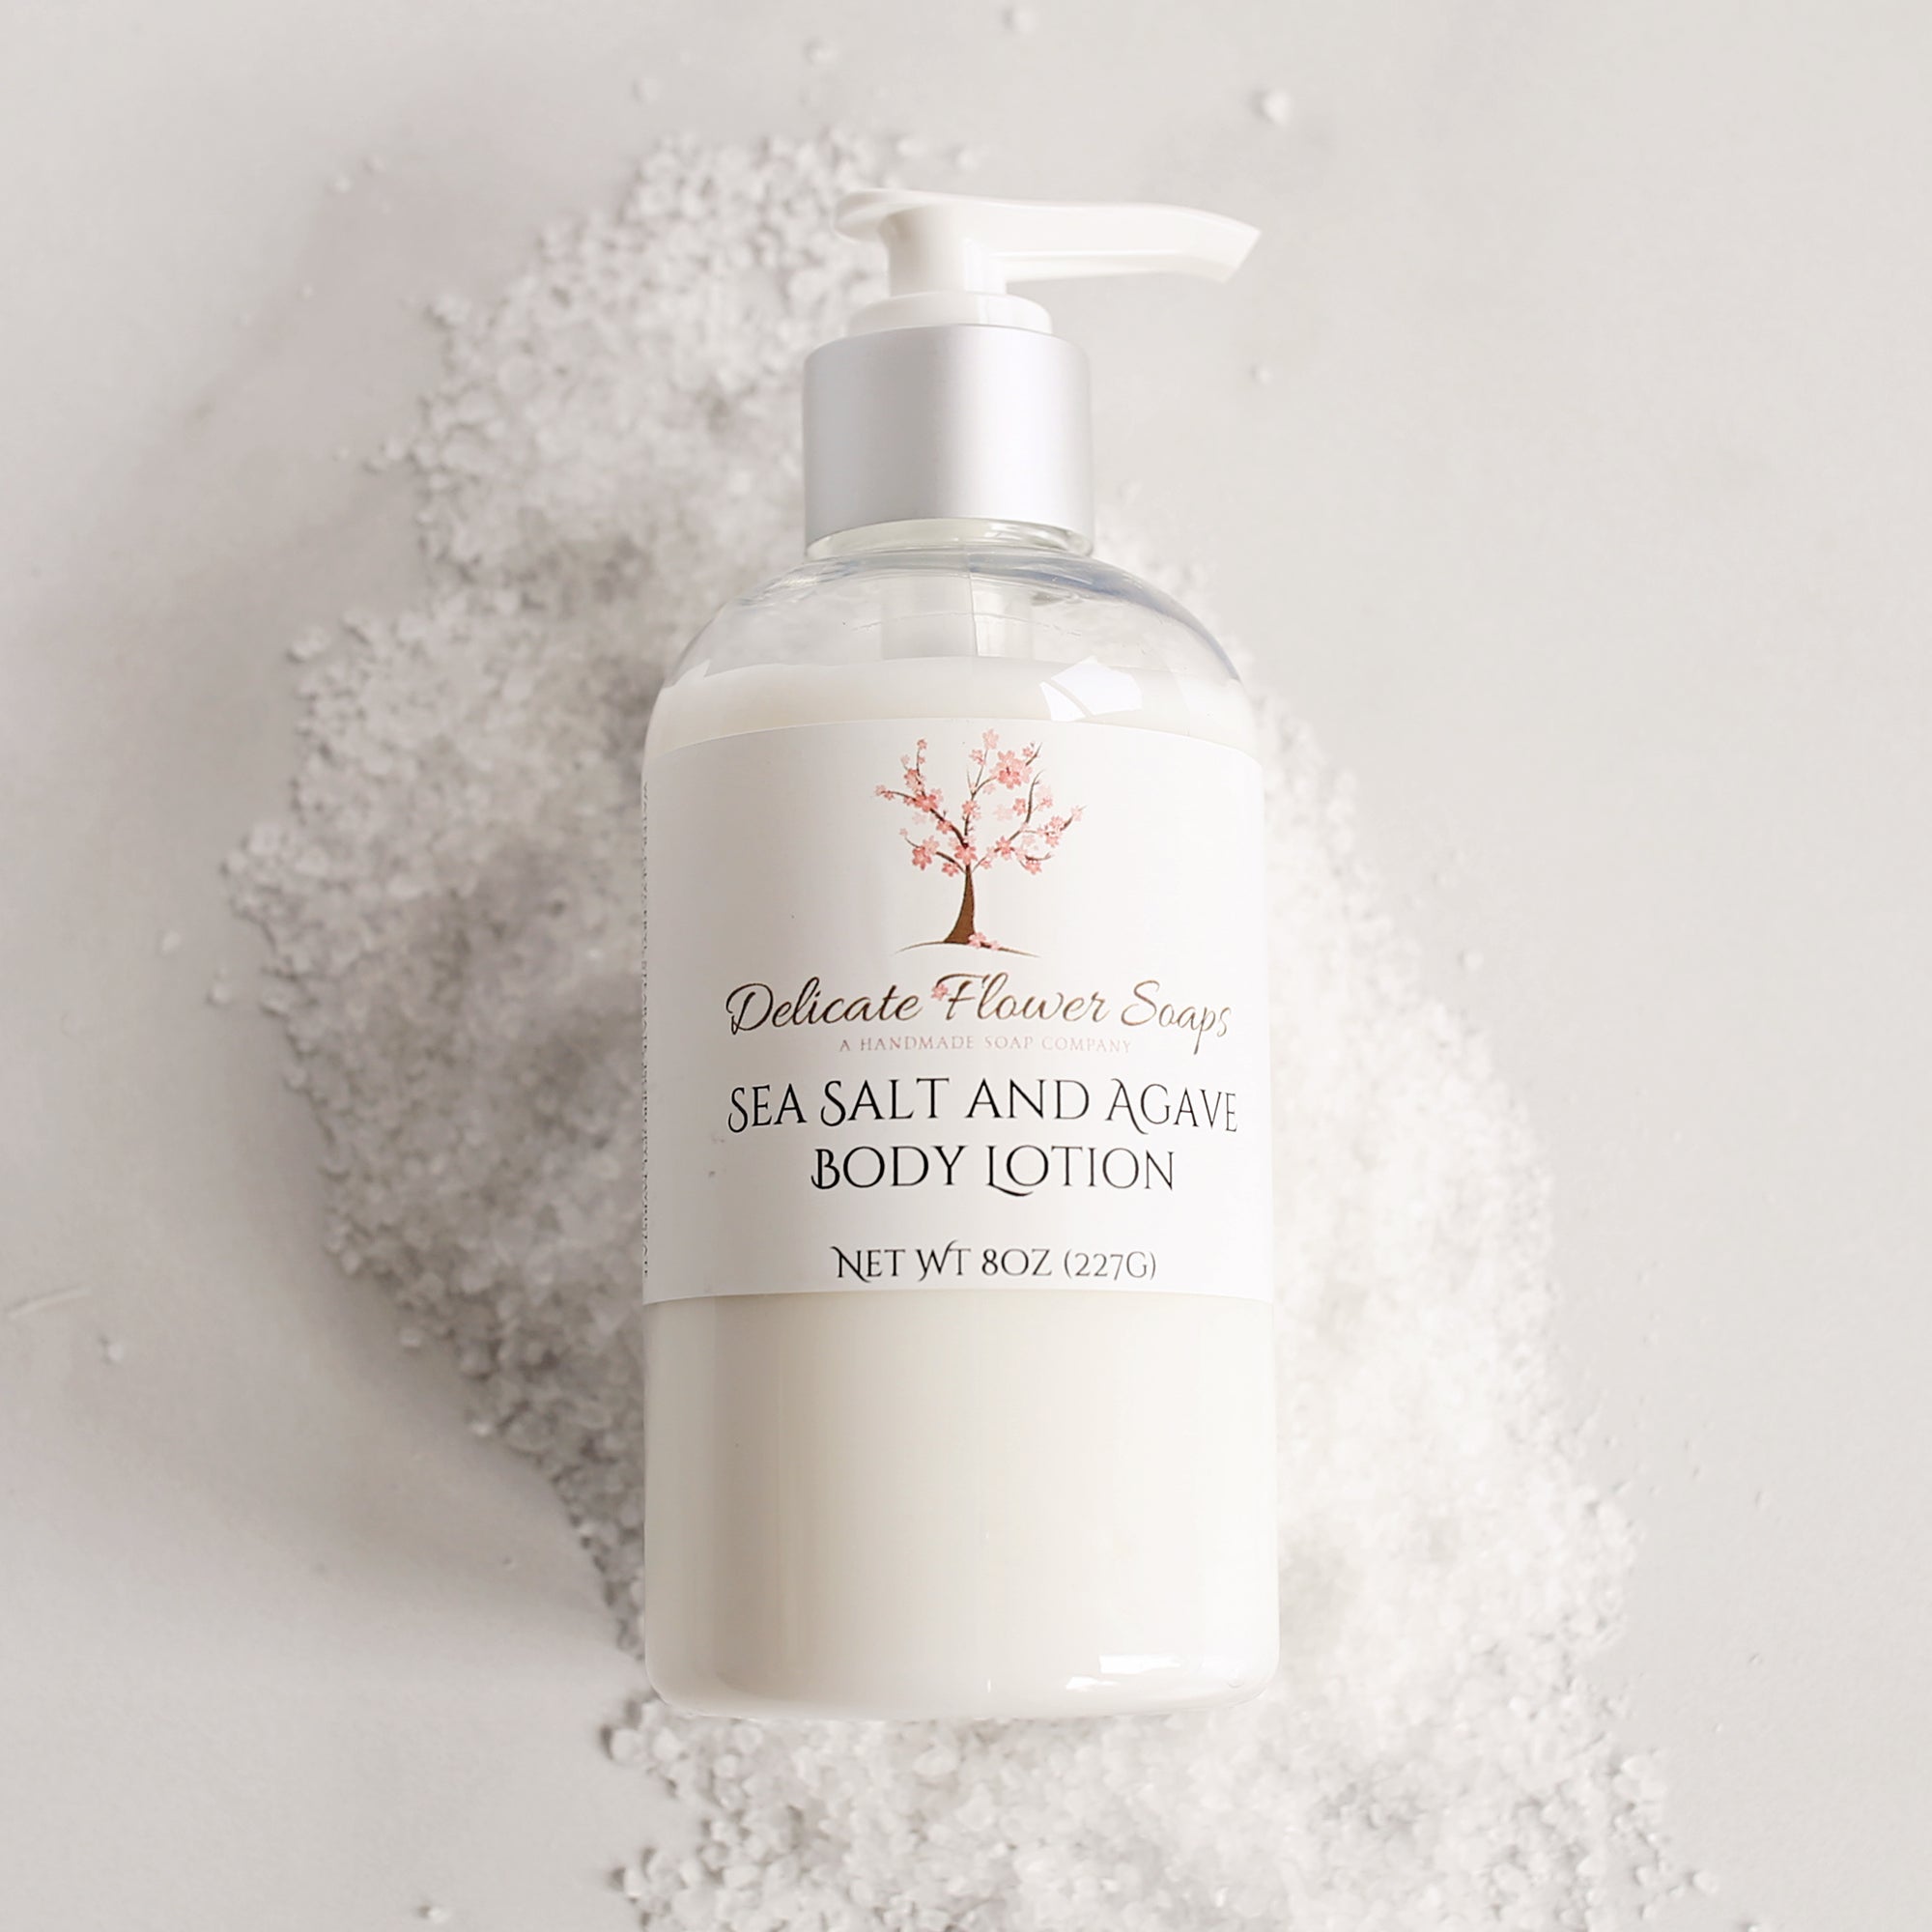 Sea Salt and Agave Body Lotion